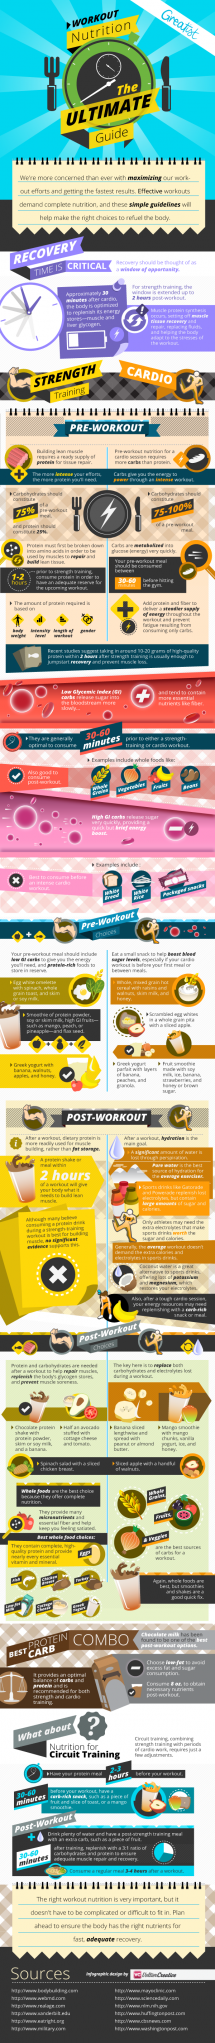 Workout Nutrition - The Ultimate Guide [infographic] - Healthy Eating